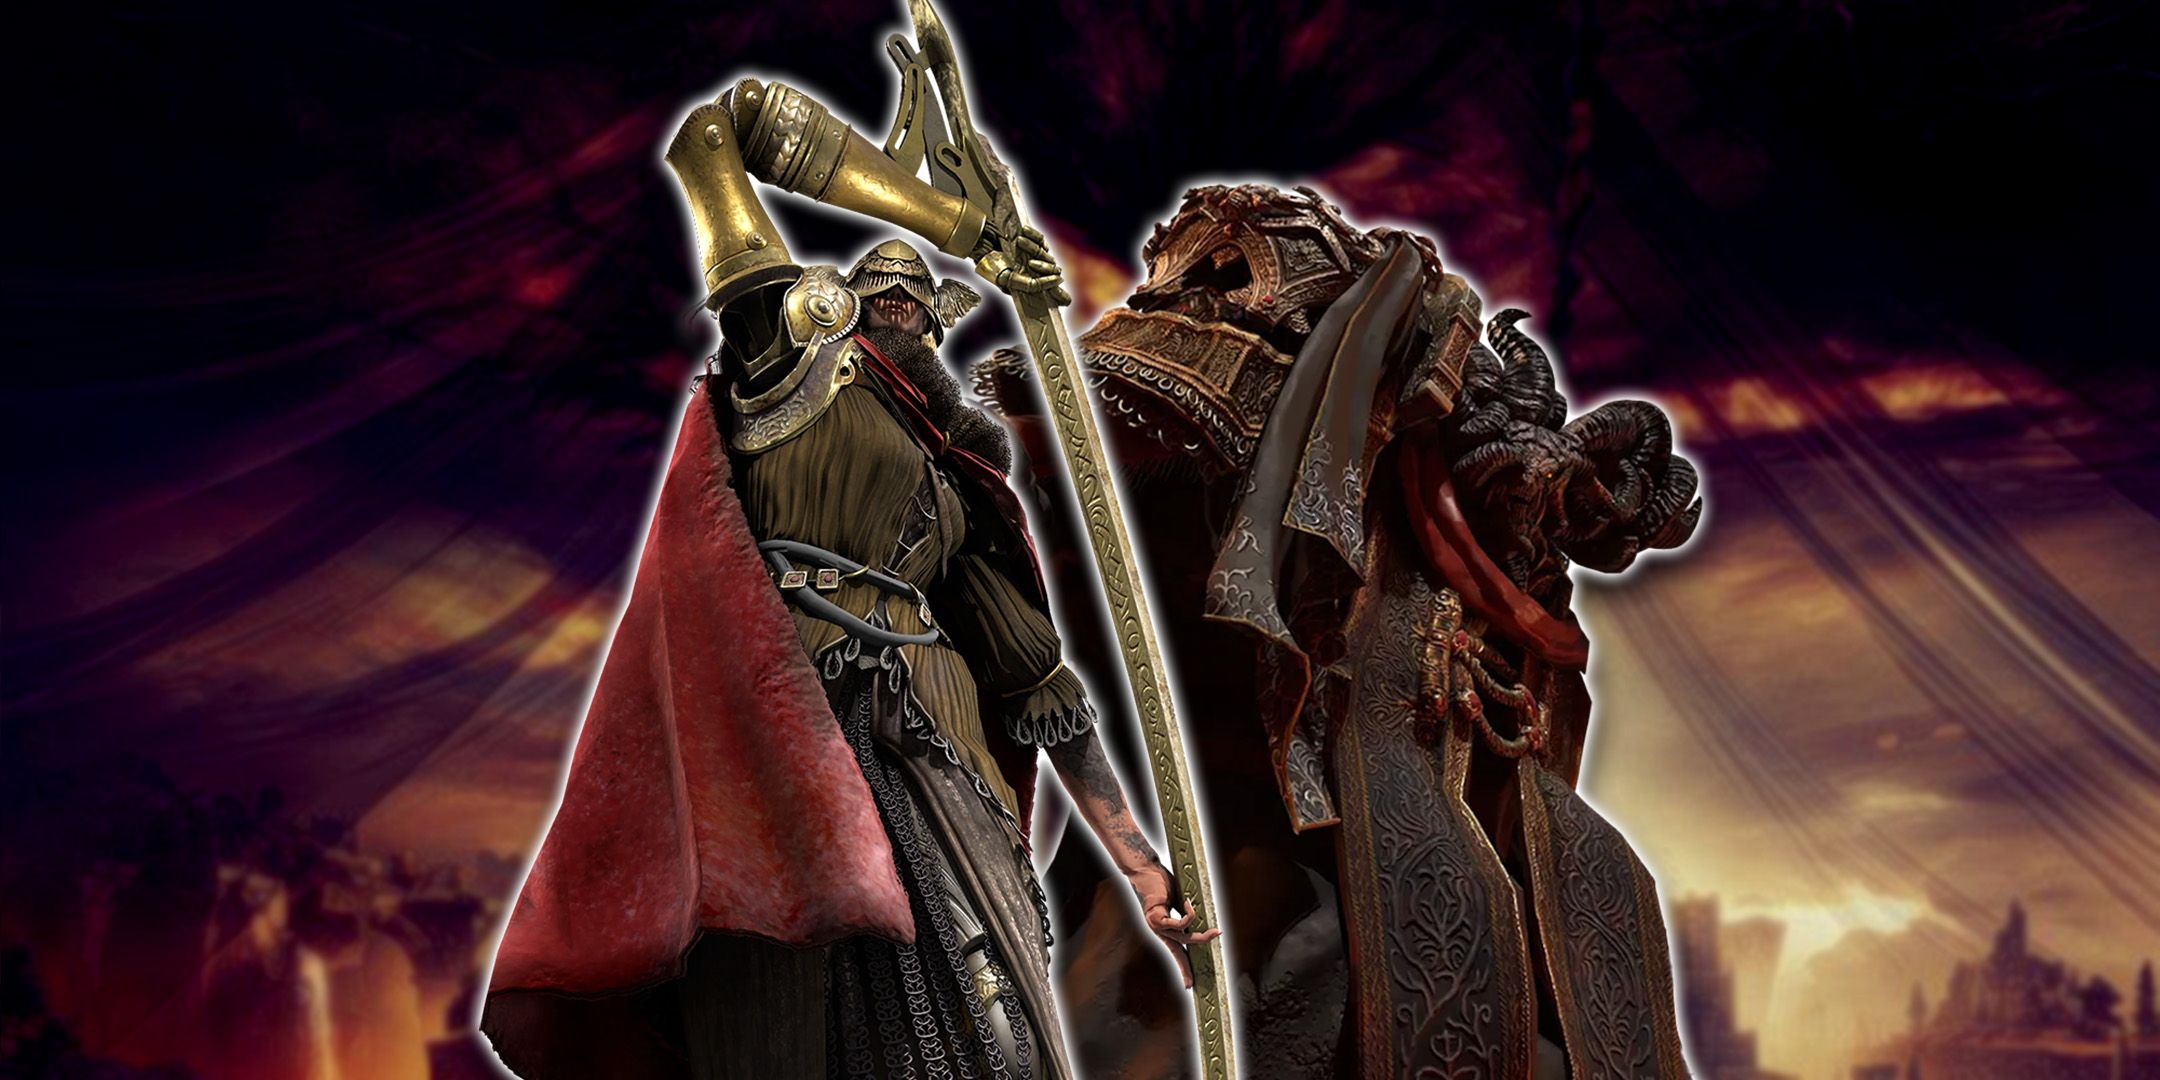 Malenia and Mohg Lord of Blood from Elden Ring standing side by side holding weapons